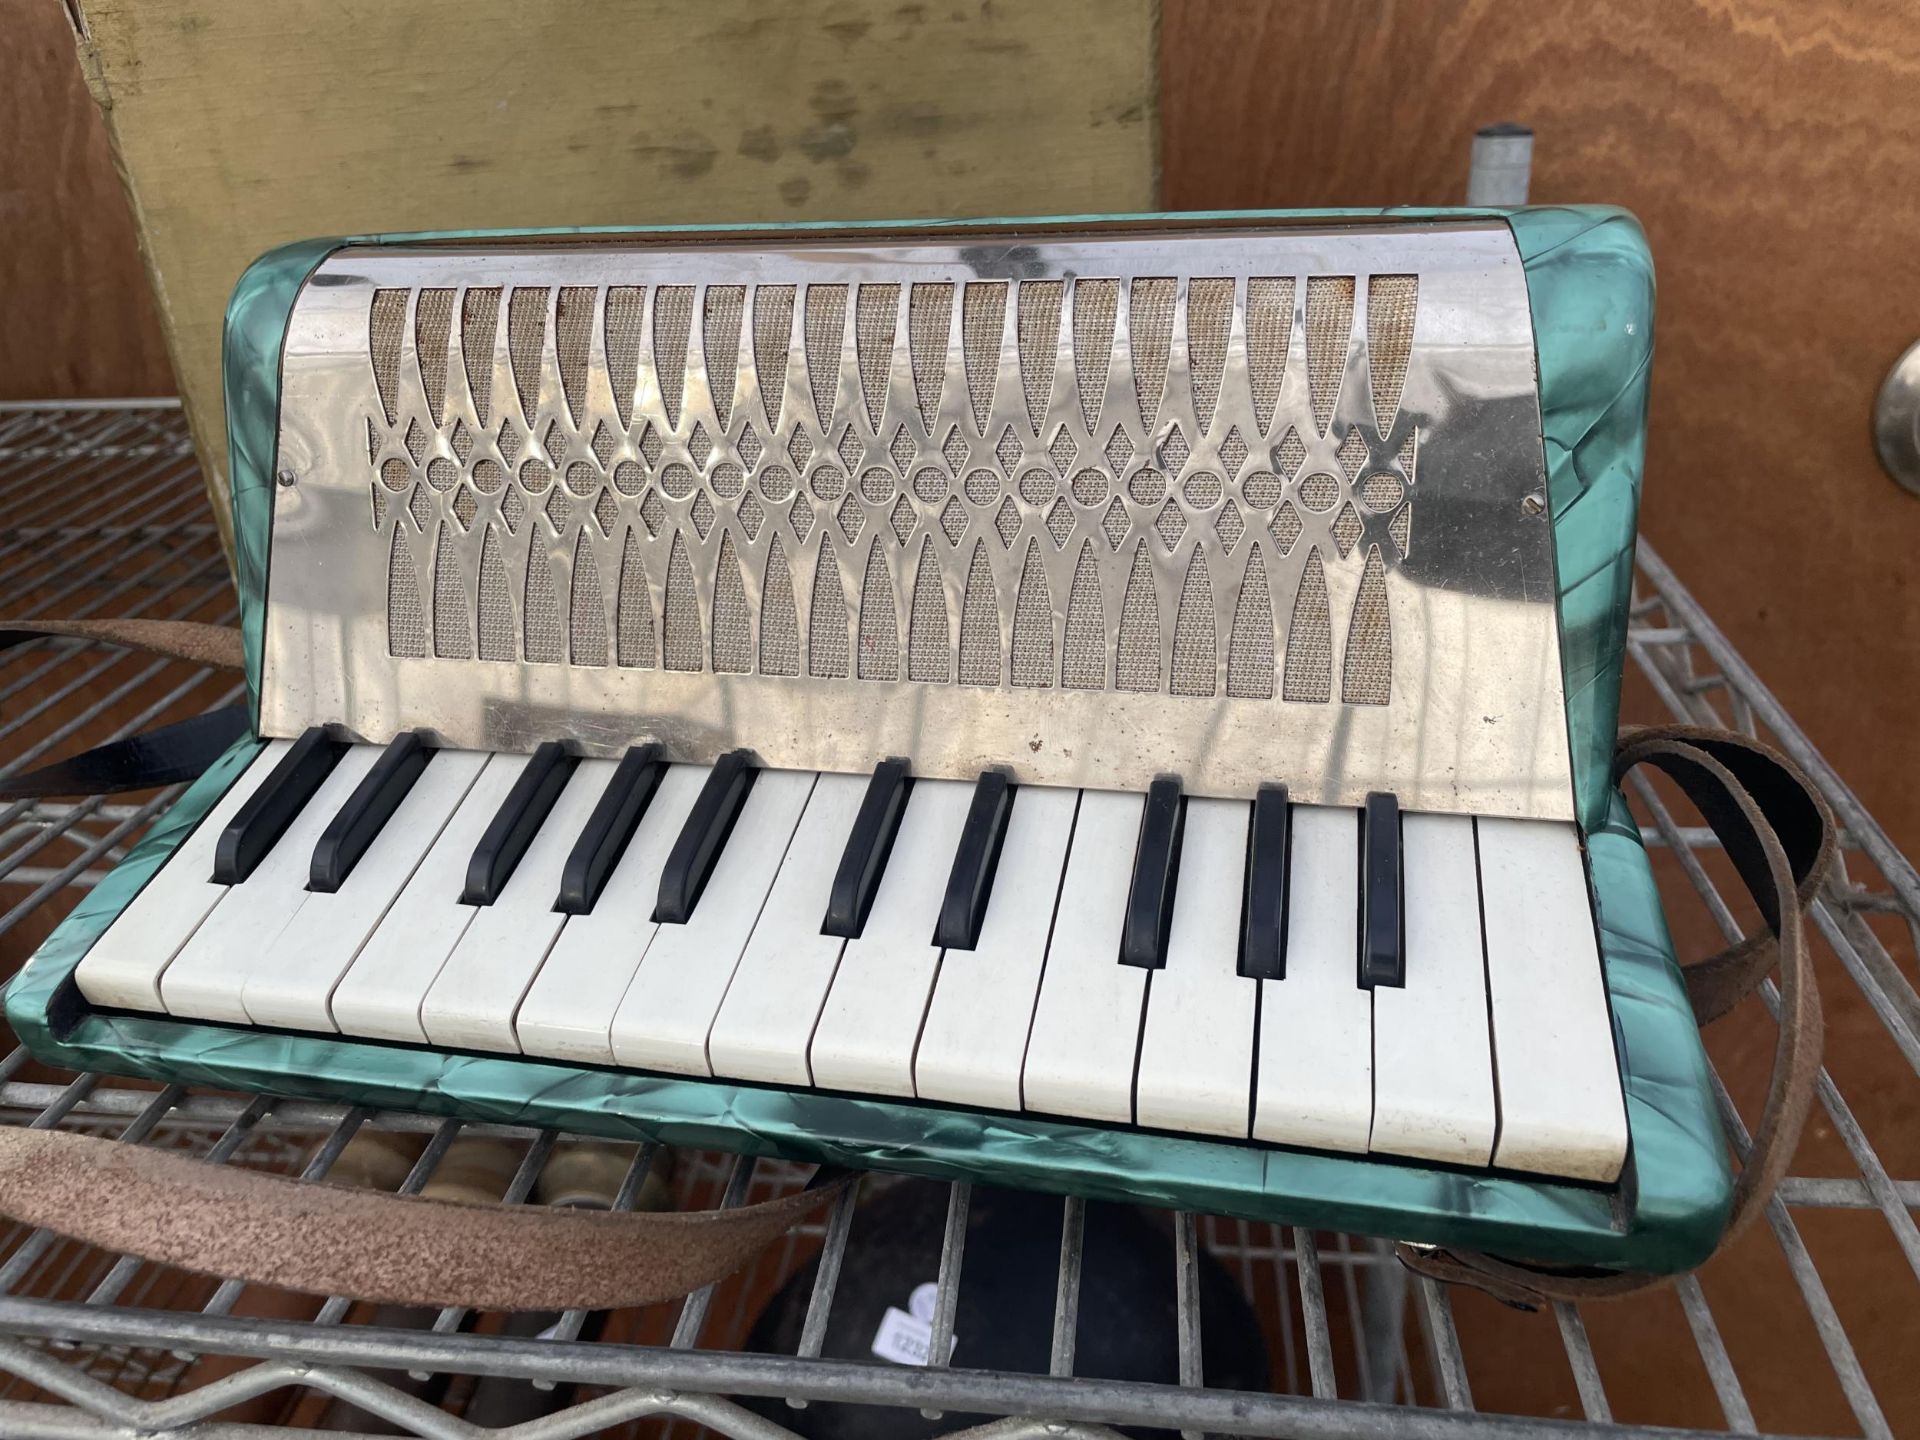 A VINTAGE GERMAN HOHNER MIGNON II ACCORDIAN SERIAL NUMBER 11931 IN GOOD WORKING BUT NO WARRANTY - Image 2 of 4